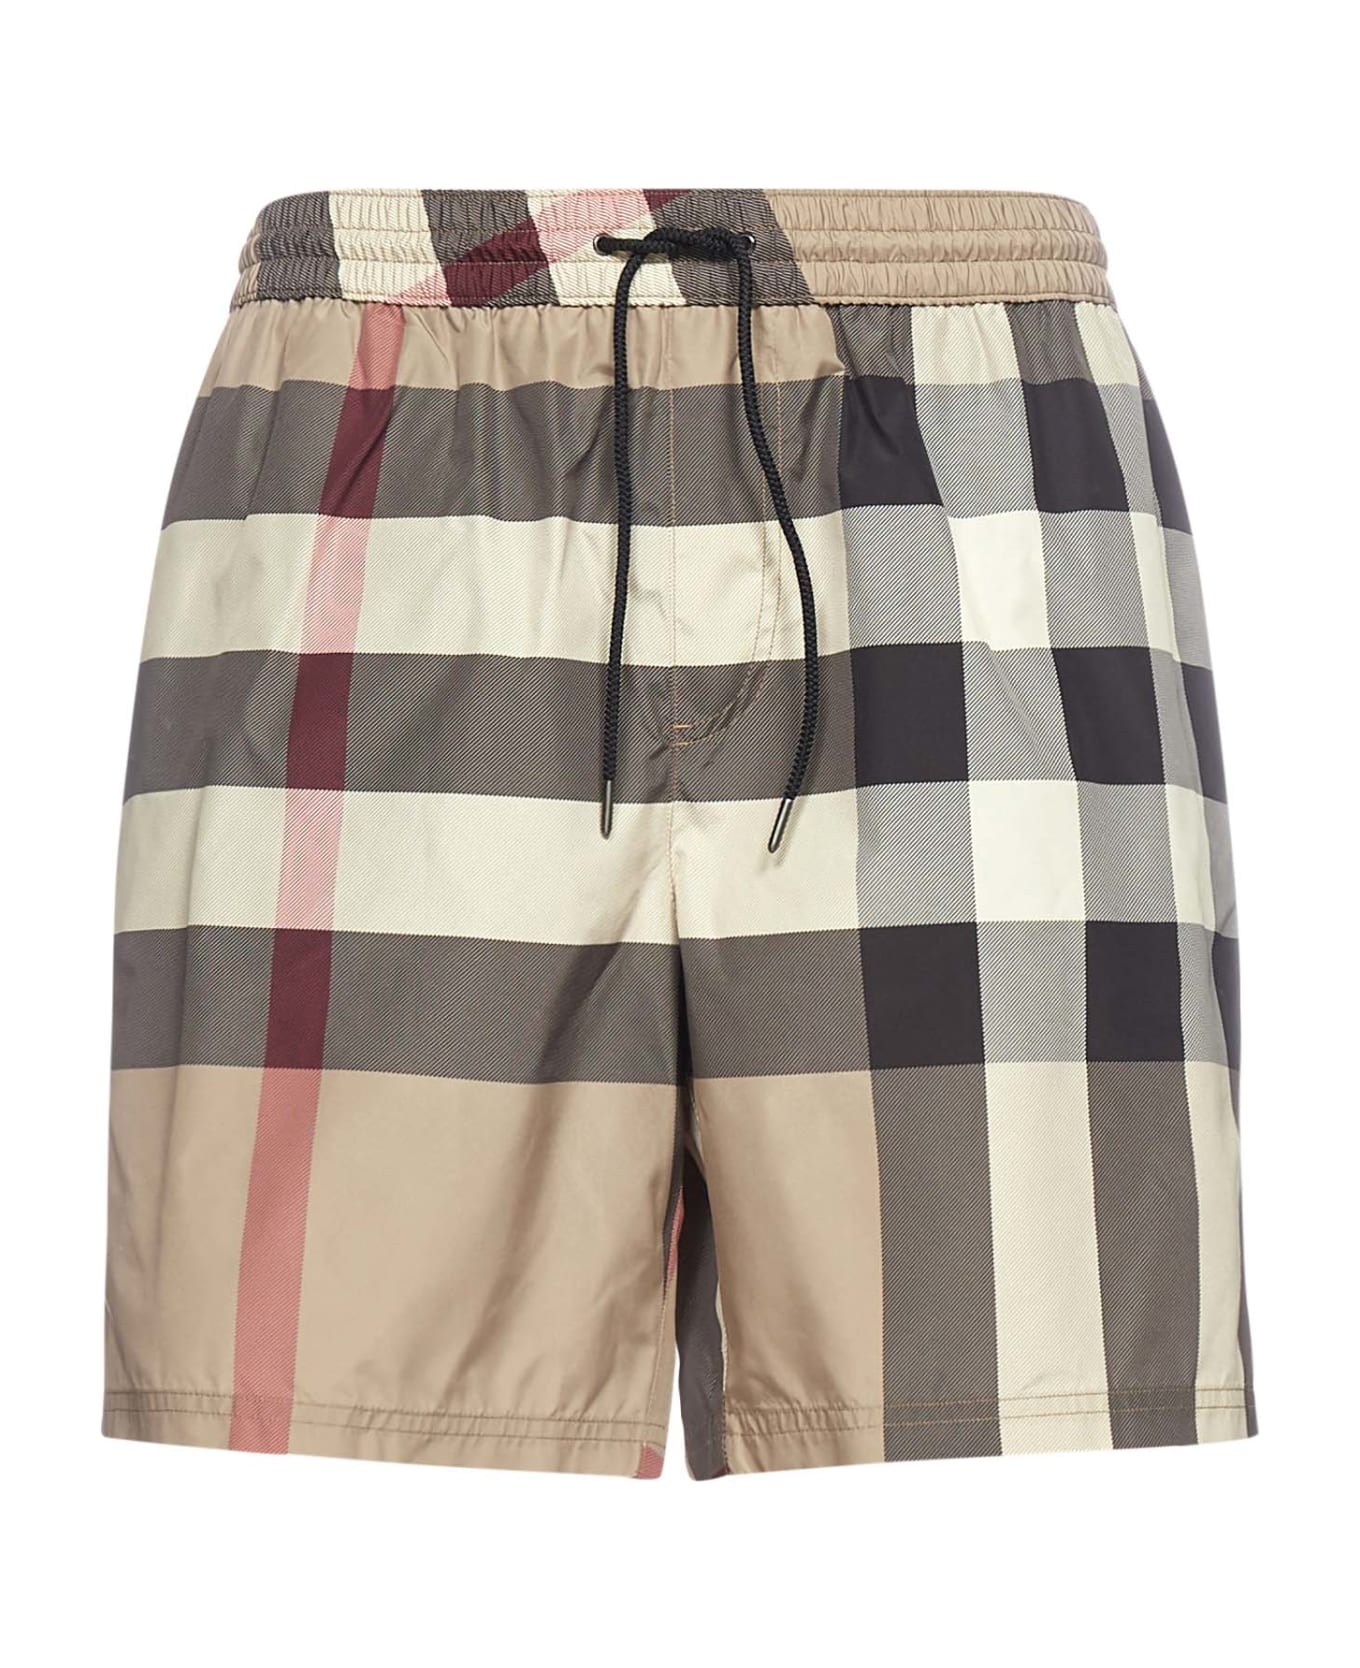 Burberry Boxer Swimsuit With Vintage Check Pattern - Archive beige ip chk